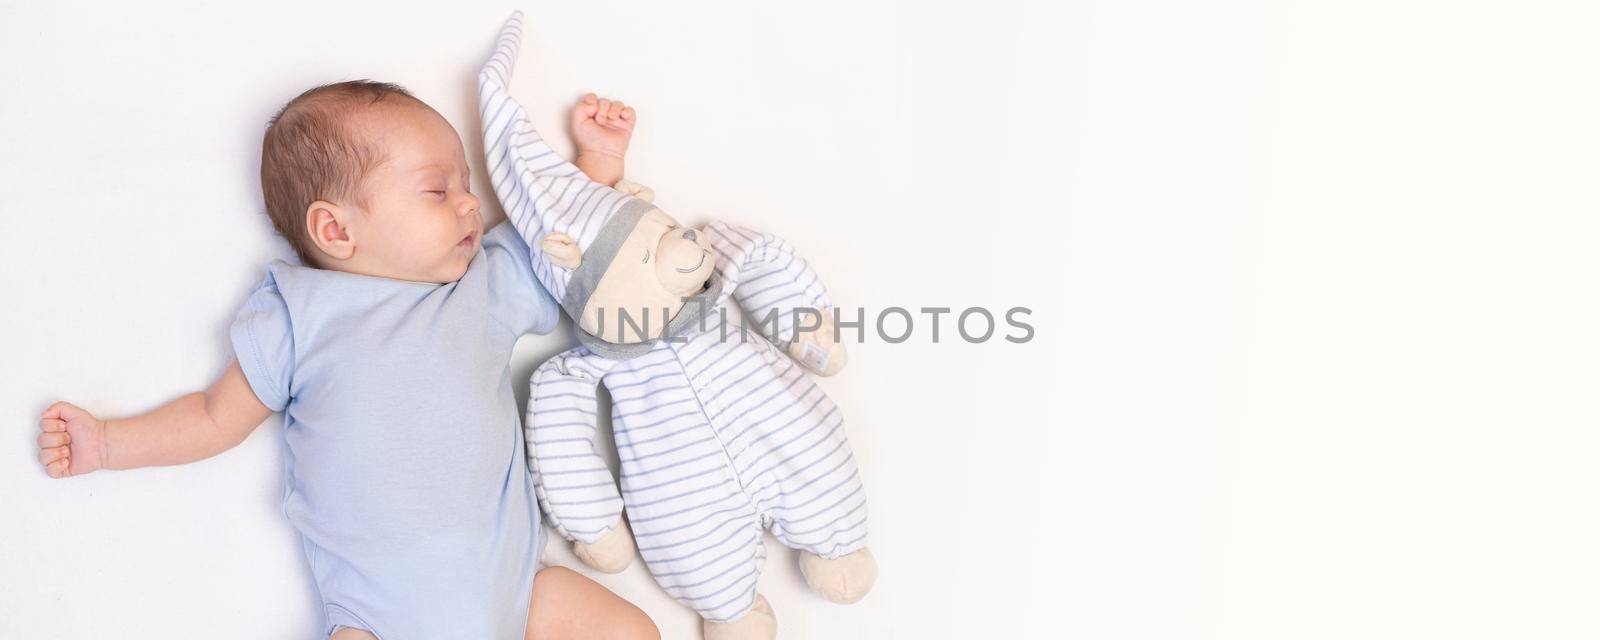 Banner The baby is lying in a crib with a teddy bear . The baby is 0-3 months old. A calm sleeping baby. Healthy baby sleep. An article about toys for kids. A soft toy. by alenka2194